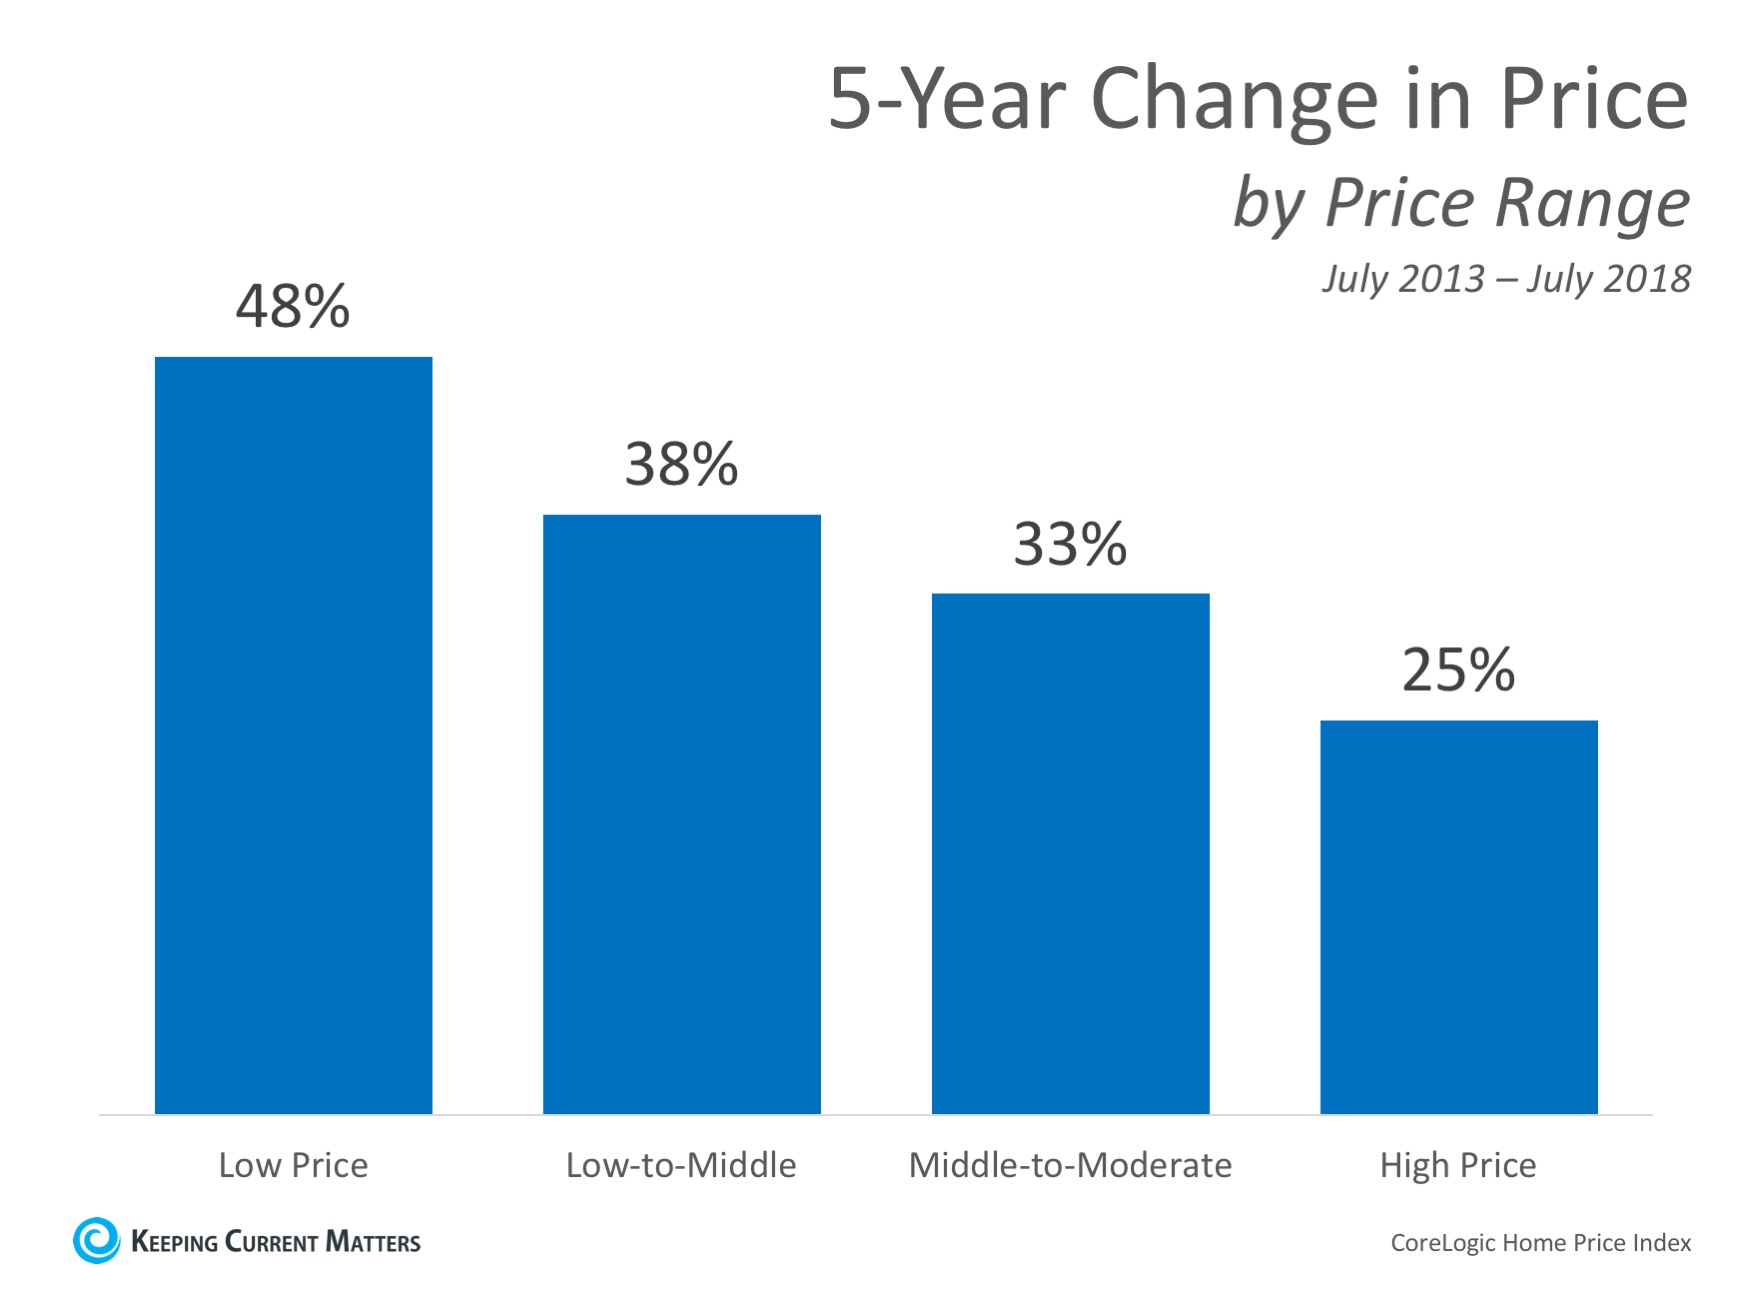 5 Year Price Change of Homes